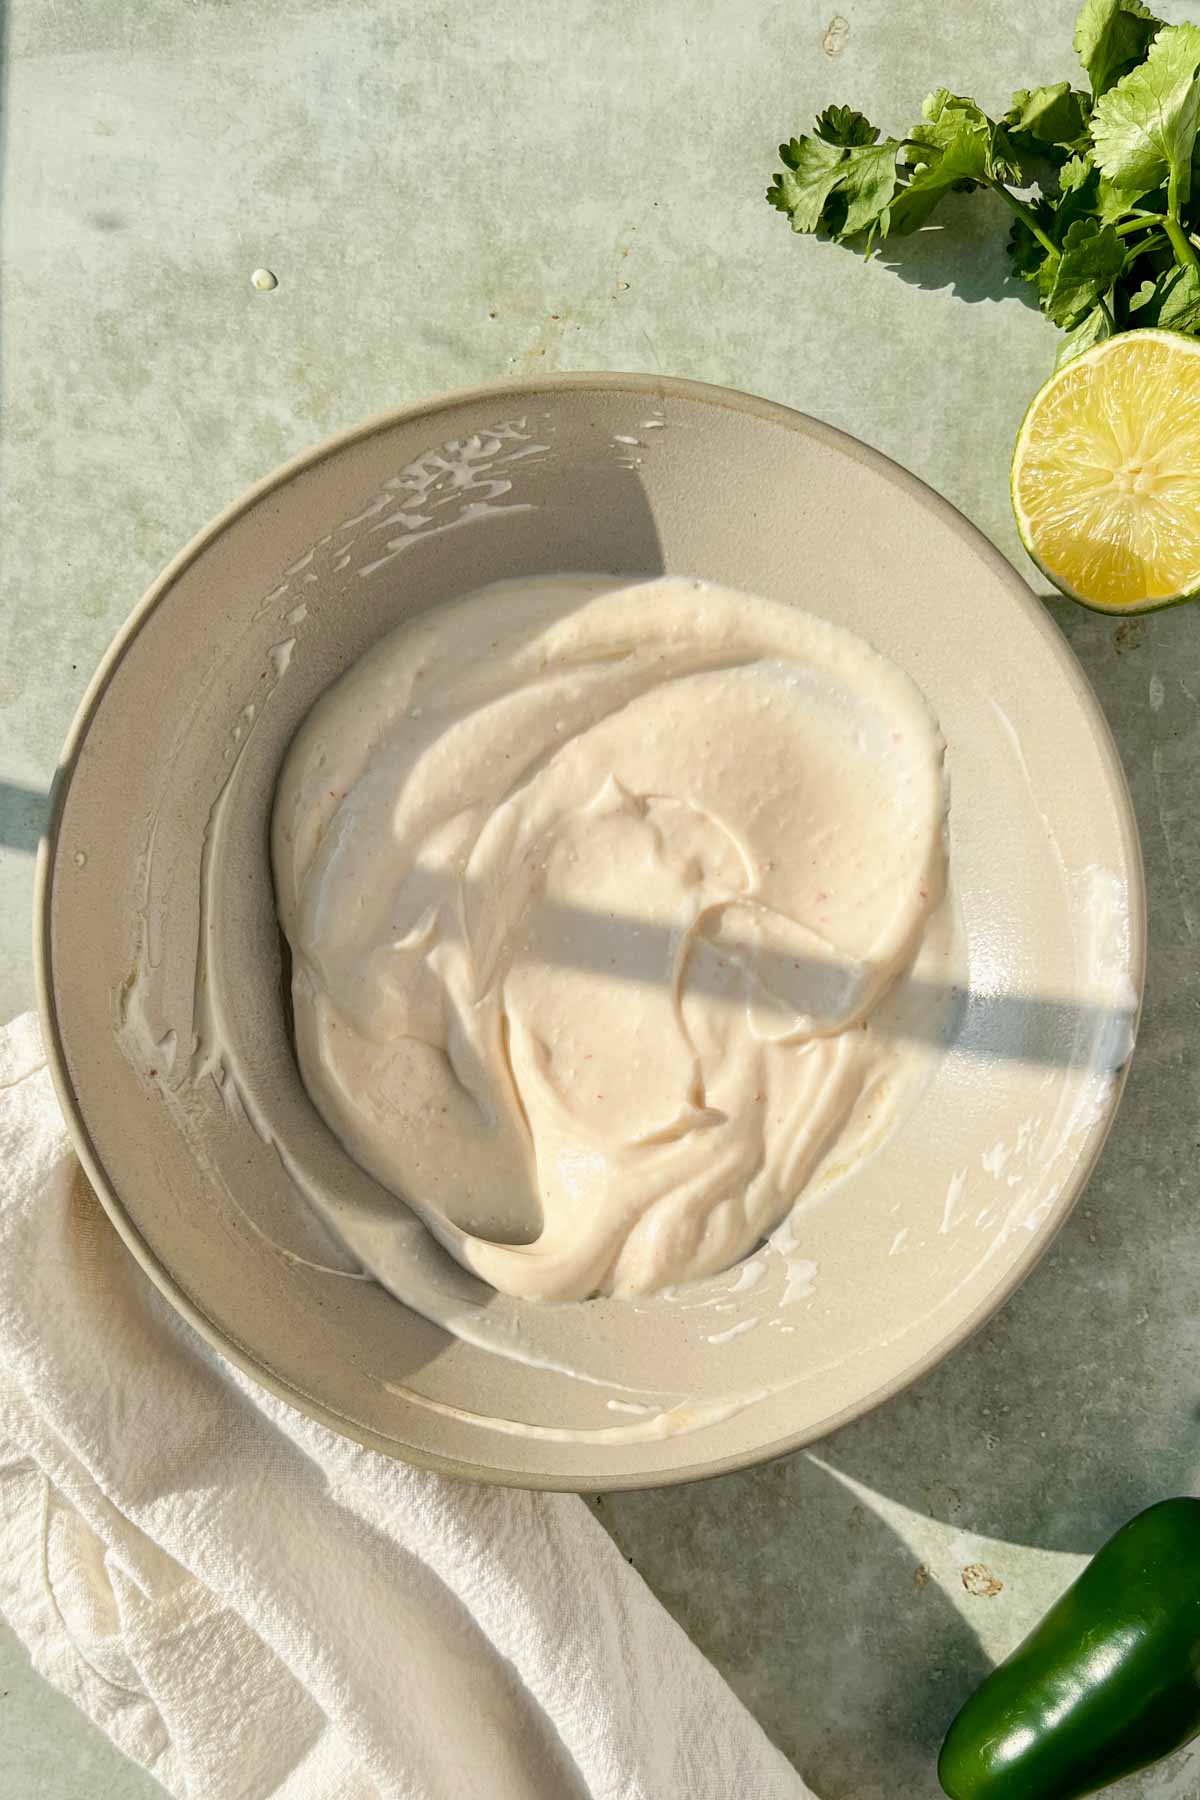 creamy white dressing mixed in a tan bowl.